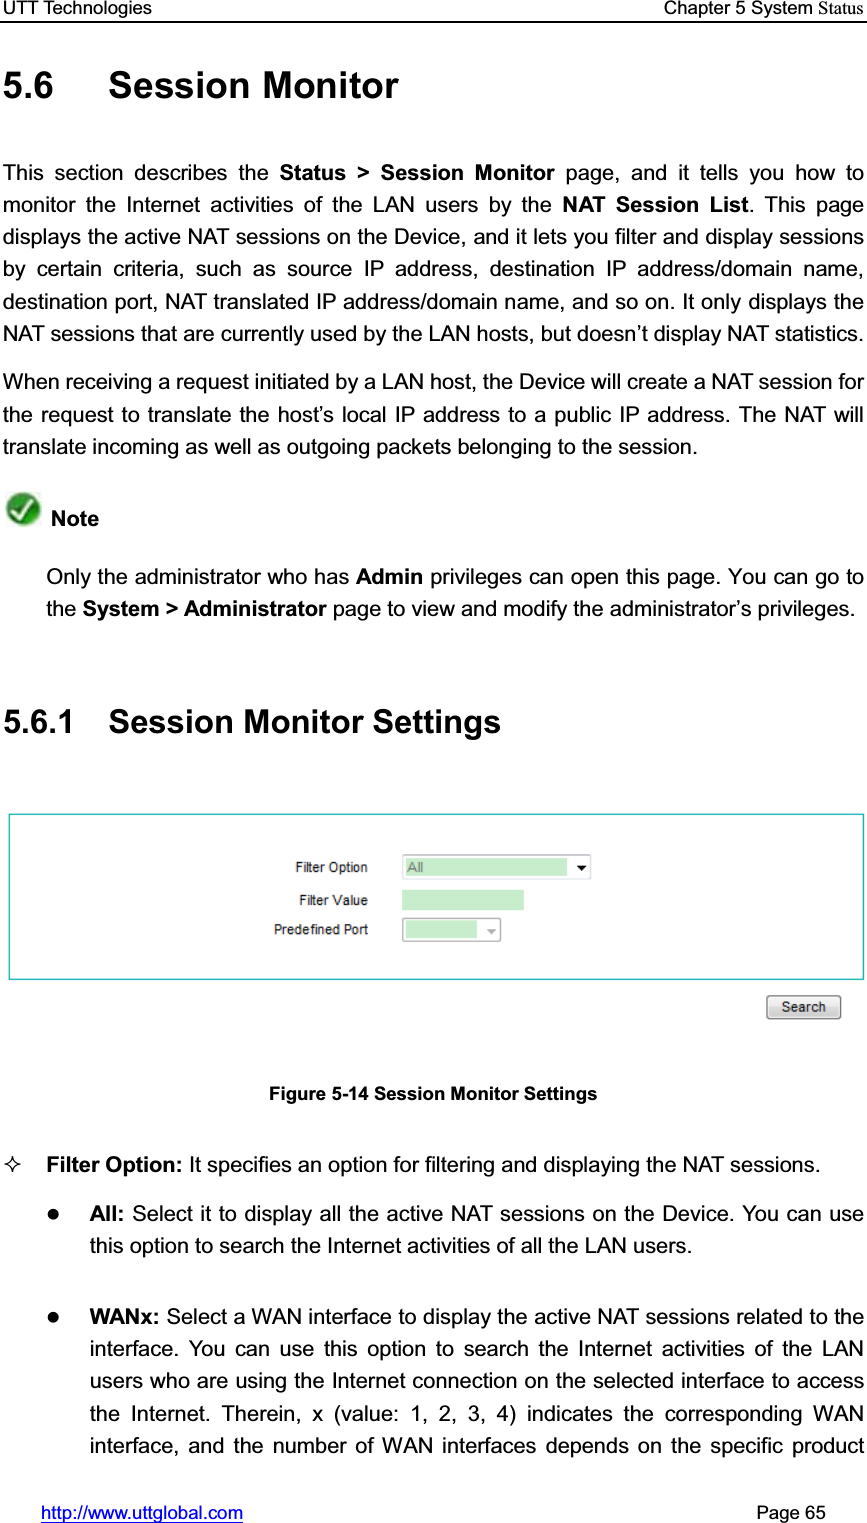 UTT Technologies    Chapter 5 System Statushttp://www.uttglobal.com                                                       Page 65 5.6 Session Monitor This section describes the Status &gt; Session Monitor page, and it tells you how to monitor the Internet activities of the LAN users by the NAT Session List. This page displays the active NAT sessions on the Device, and it lets you filter and display sessions by certain criteria, such as source IP address, destination IP address/domain name, destination port, NAT translated IP address/domain name, and so on. It only displays the NAT sessions that are currently used by the LAN hosts, but doesn¶t display NAT statistics. When receiving a request initiated by a LAN host, the Device will create a NAT session for the request to translate the host¶s local IP address to a public IP address. The NAT will translate incoming as well as outgoing packets belonging to the session. Note Only the administrator who has Admin privileges can open this page. You can go to the System &gt; Administrator page to view and modify the DGPLQLVWUDWRU¶s privileges. 5.6.1  Session Monitor Settings Figure 5-14 Session Monitor Settings Filter Option: It specifies an option for filtering and displaying the NAT sessions.zAll: Select it to display all the active NAT sessions on the Device. You can usethis option to search the Internet activities of all the LAN users. zWANx: Select a WAN interface to display the active NAT sessions related to the interface. You can use this option to search the Internet activities of the LAN users who are using the Internet connection on the selected interface to access the Internet. Therein, x (value: 1, 2, 3, 4) indicates the corresponding WAN interface, and the number of WAN interfaces depends on the specific product 